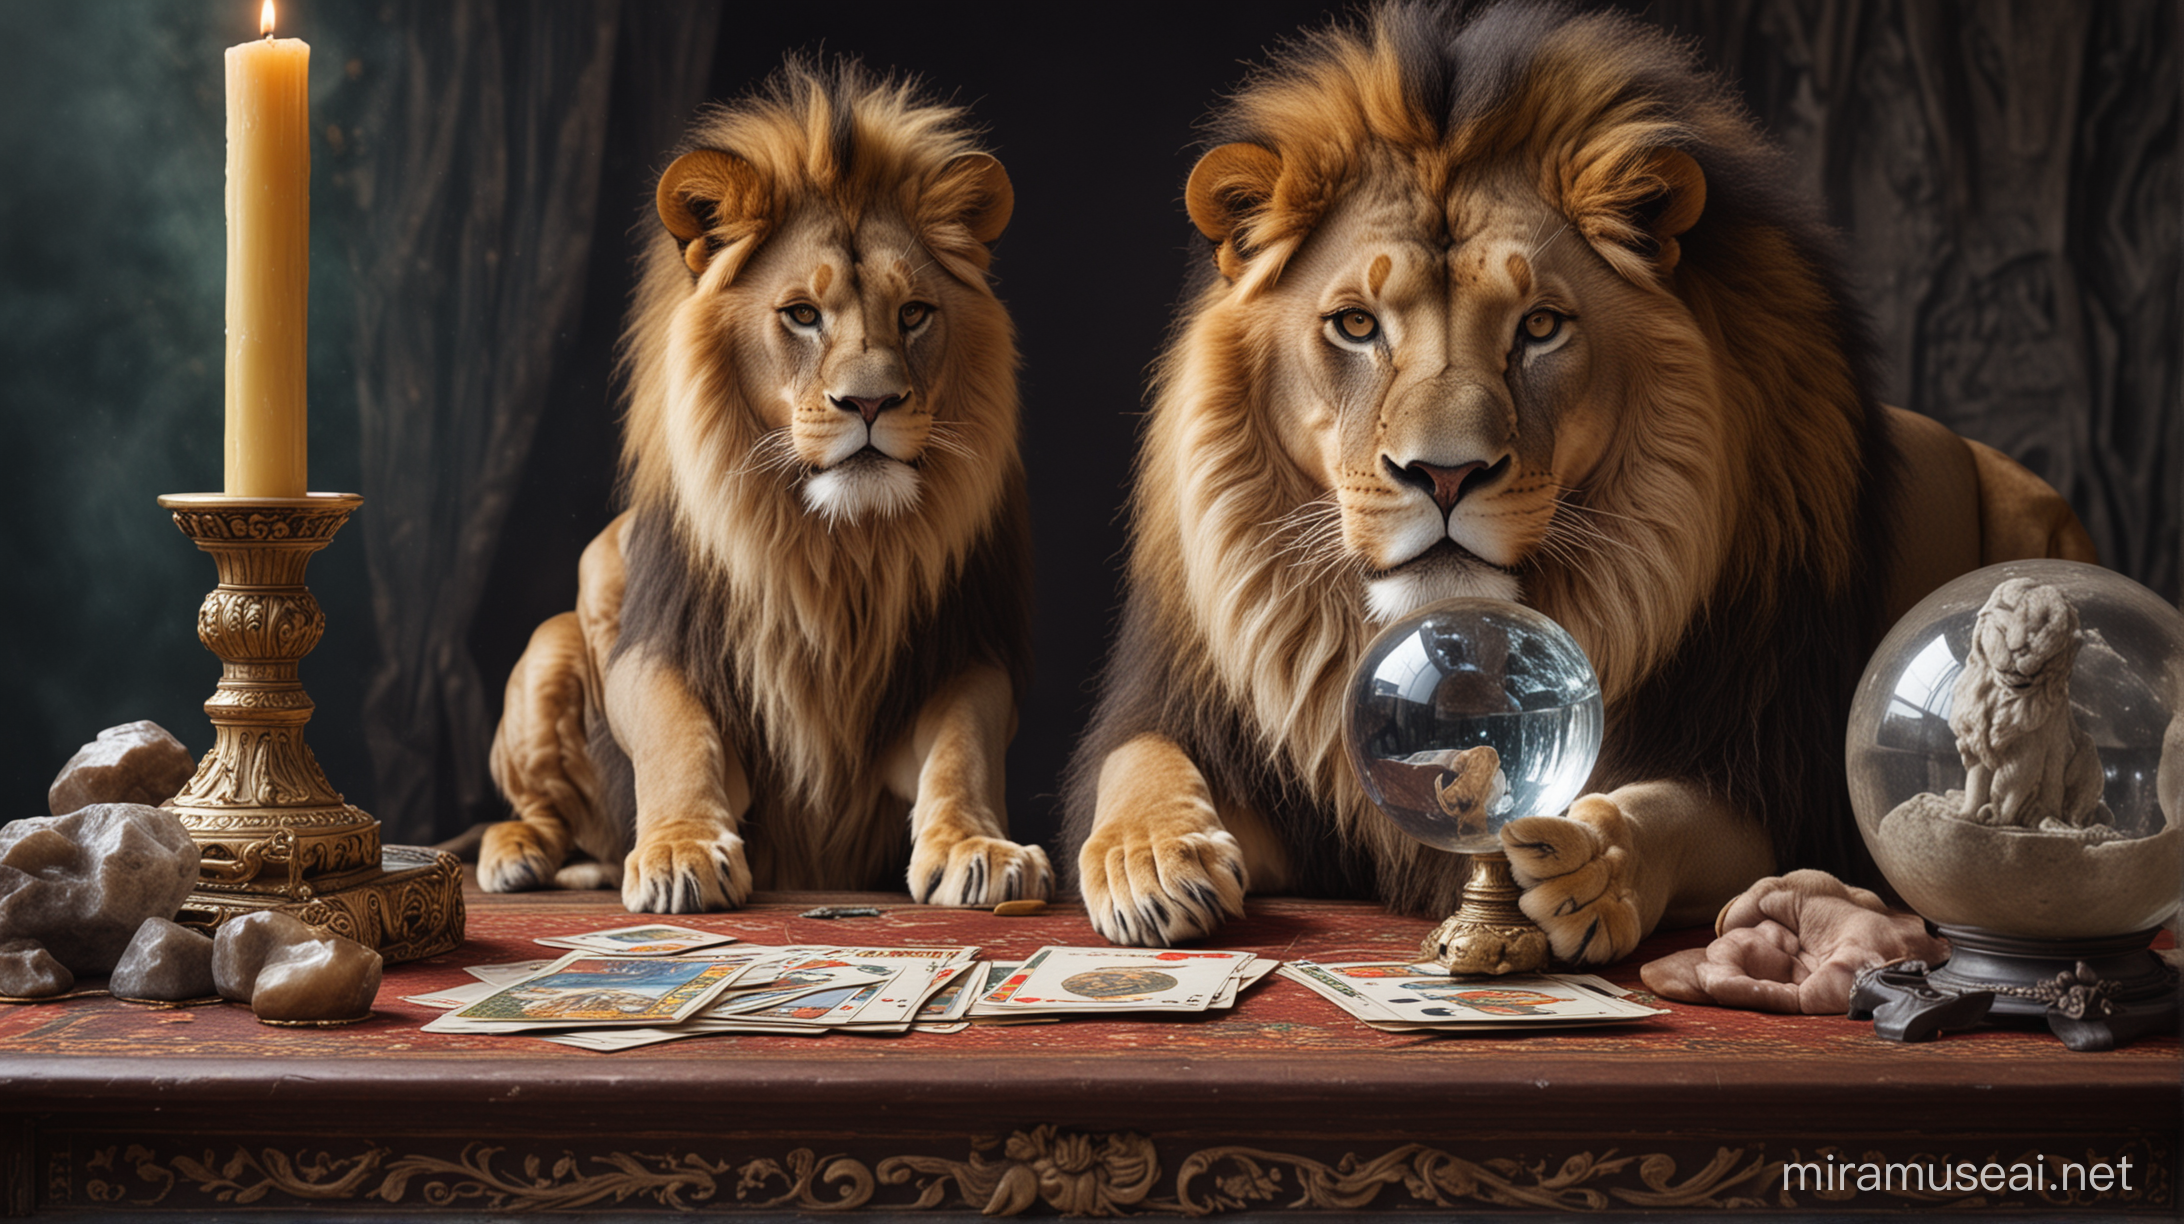 A lion doing tarot readings with a crystal ball